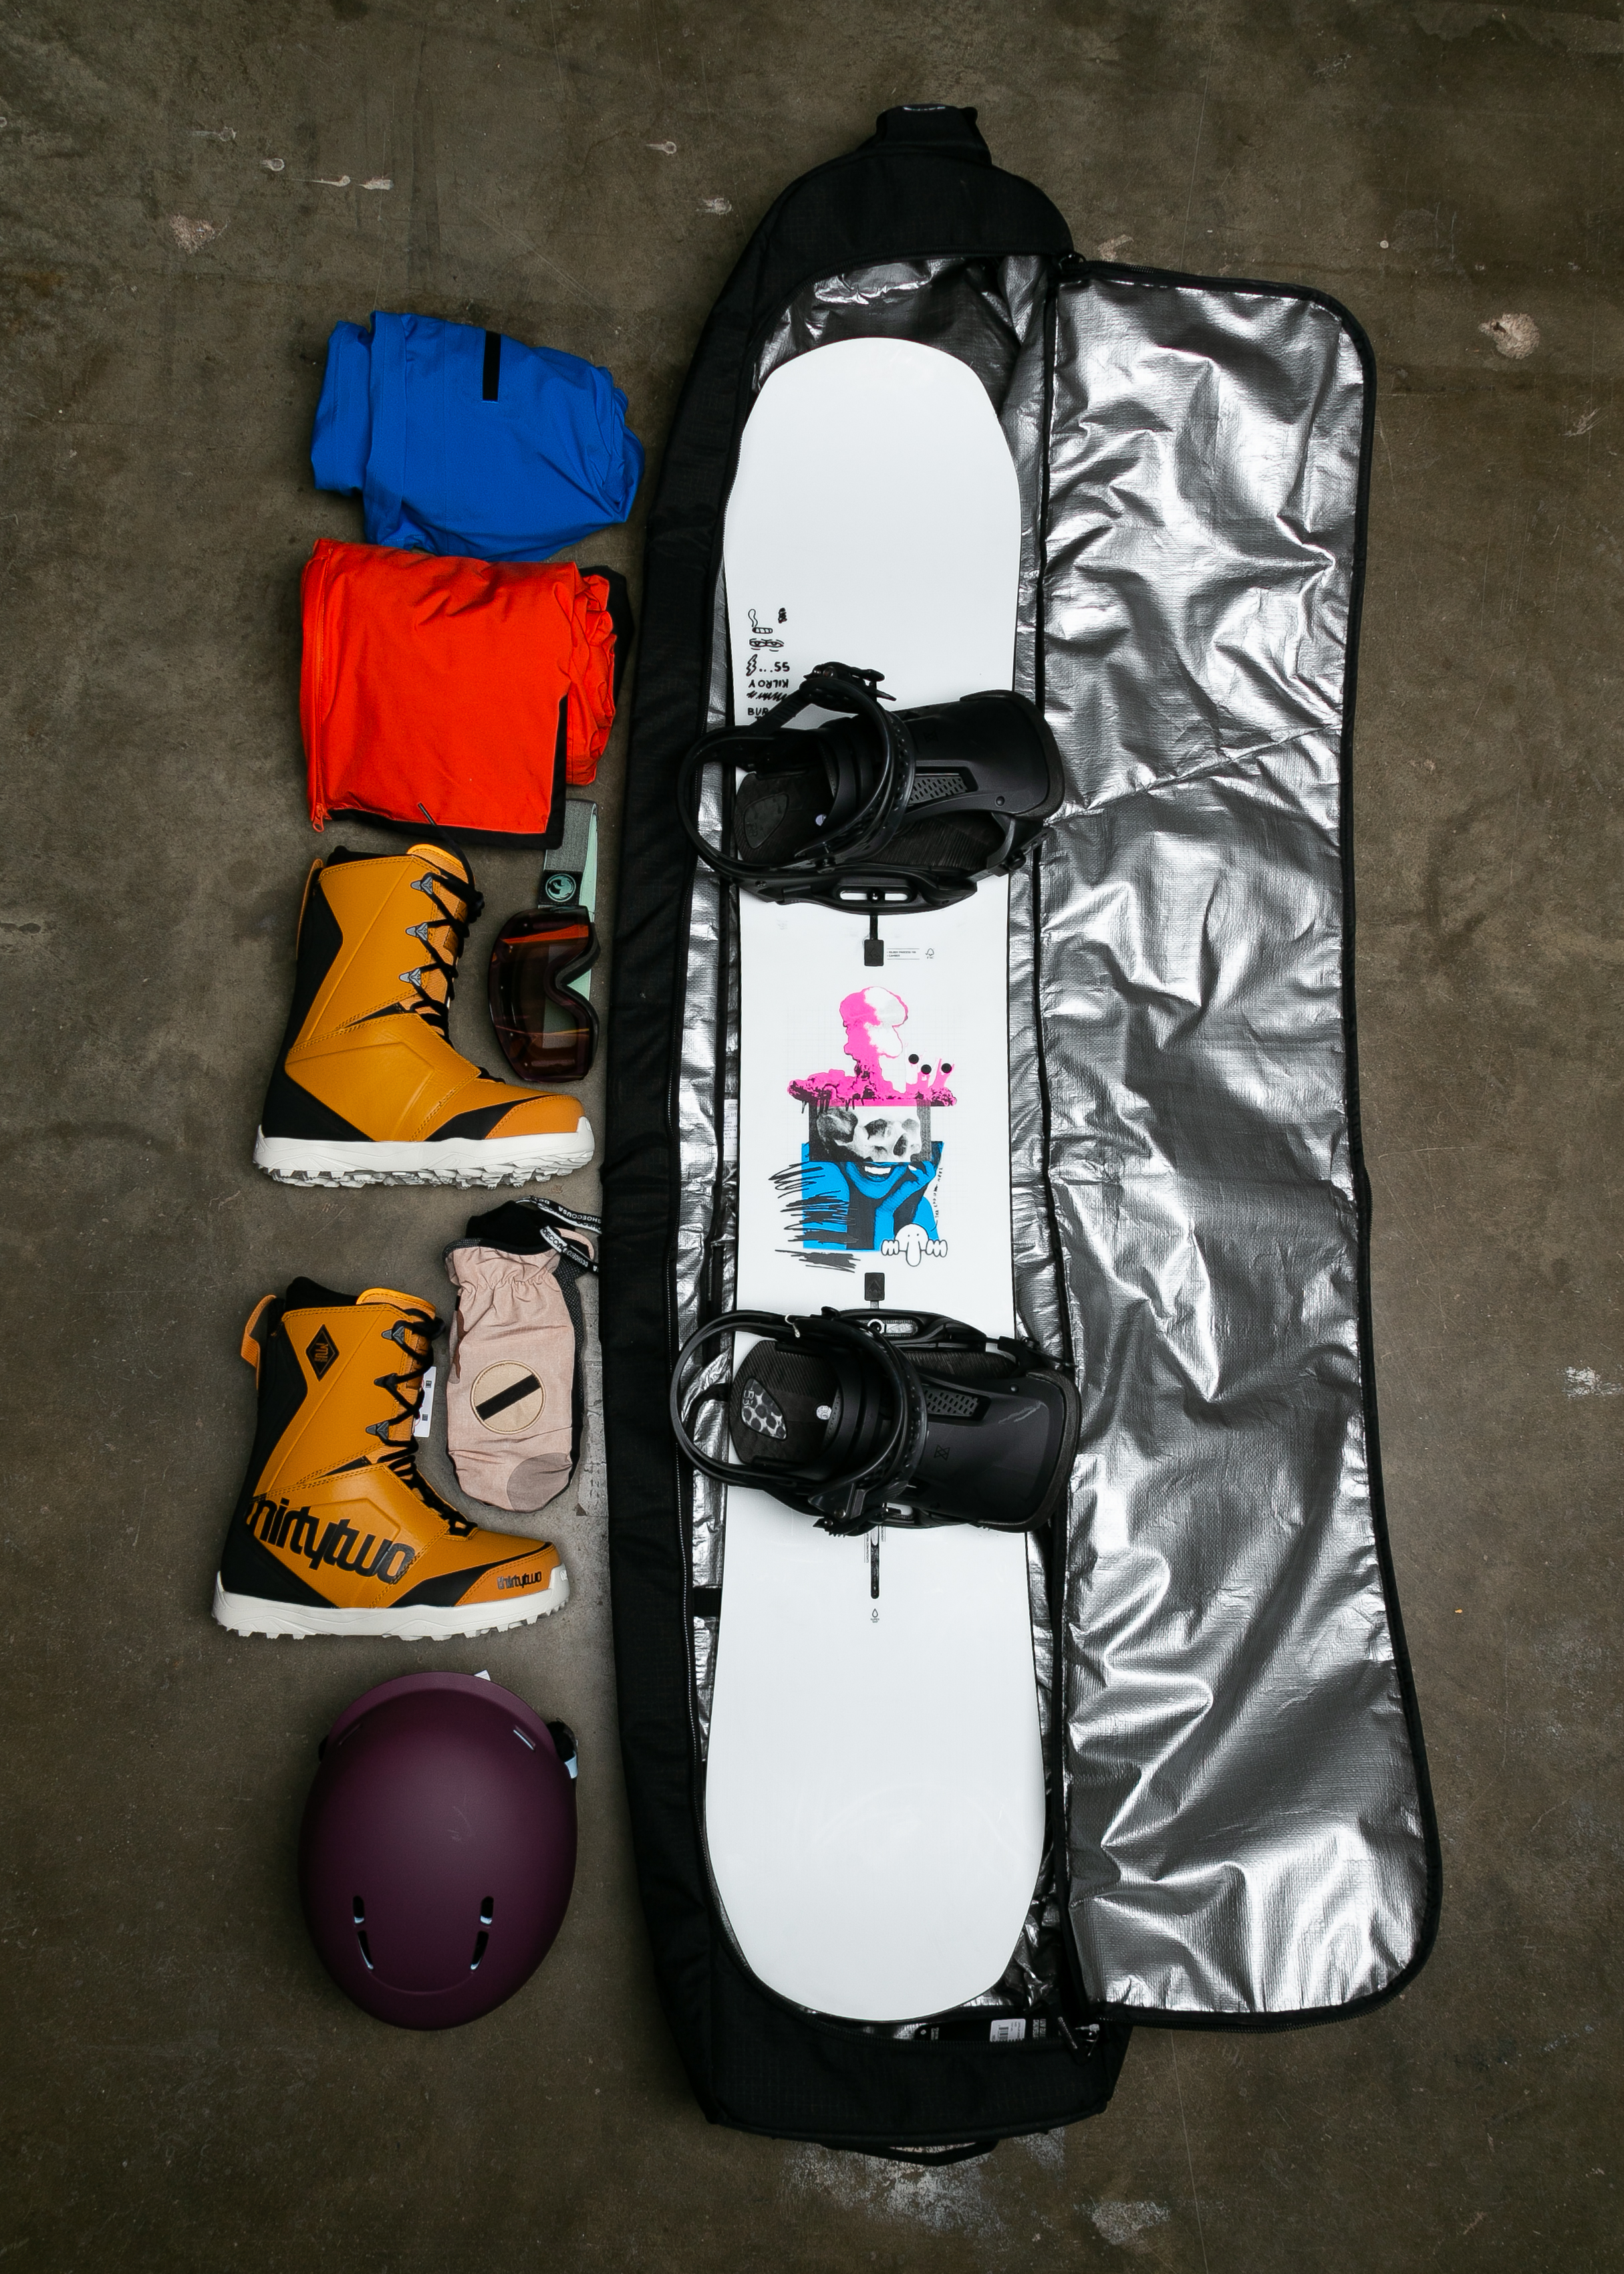 board bag with snowboard and other items unpacked for flying with snowboards